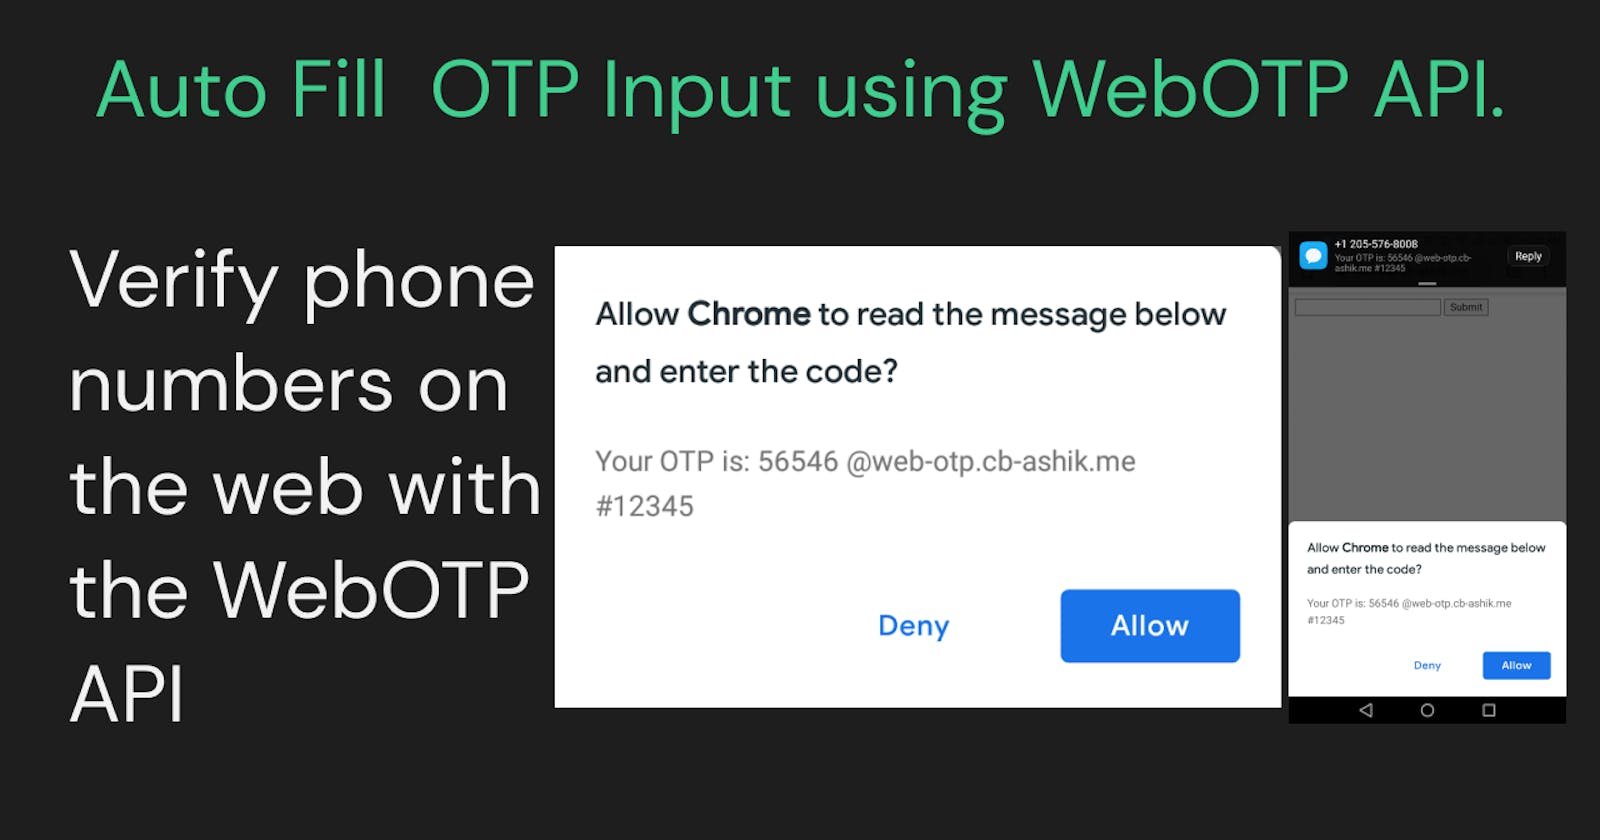 Verify phone numbers on the web with the WebOTP API